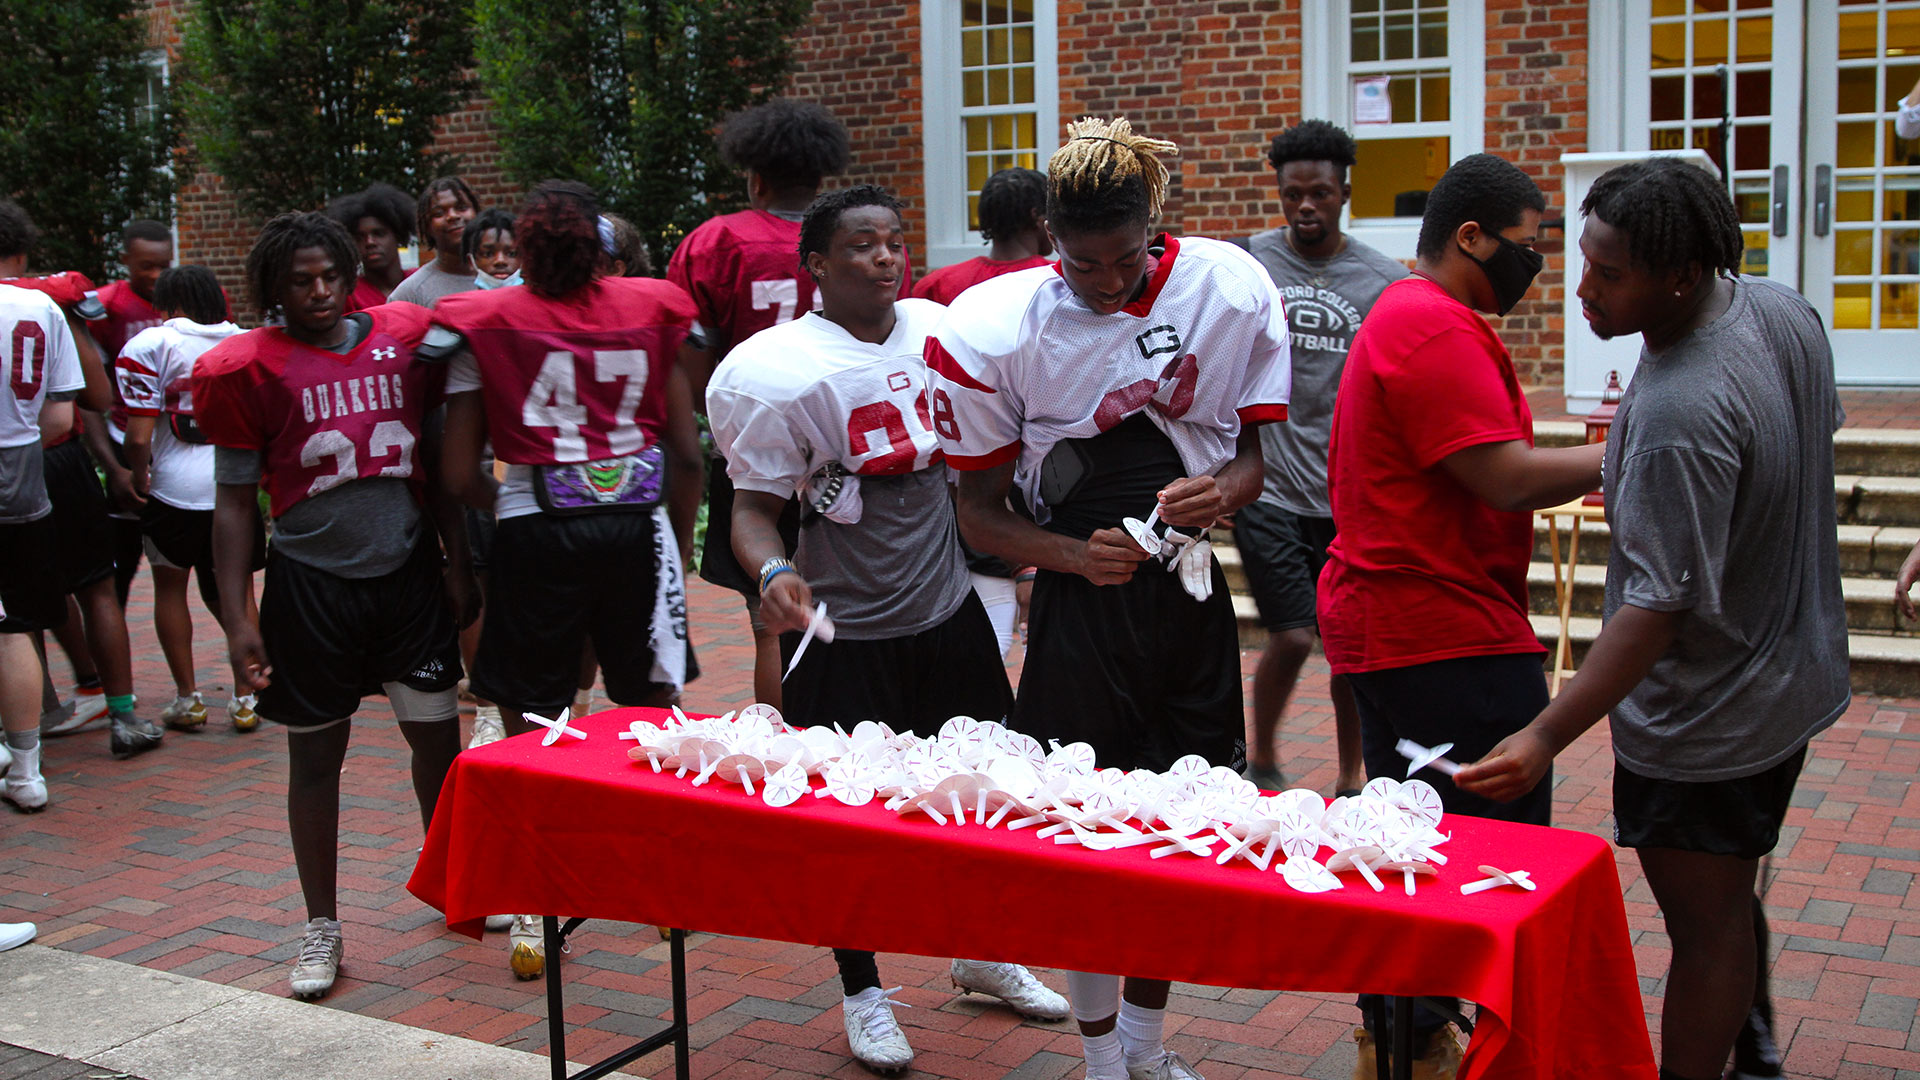 A crowd of football players arrives to select their candles.